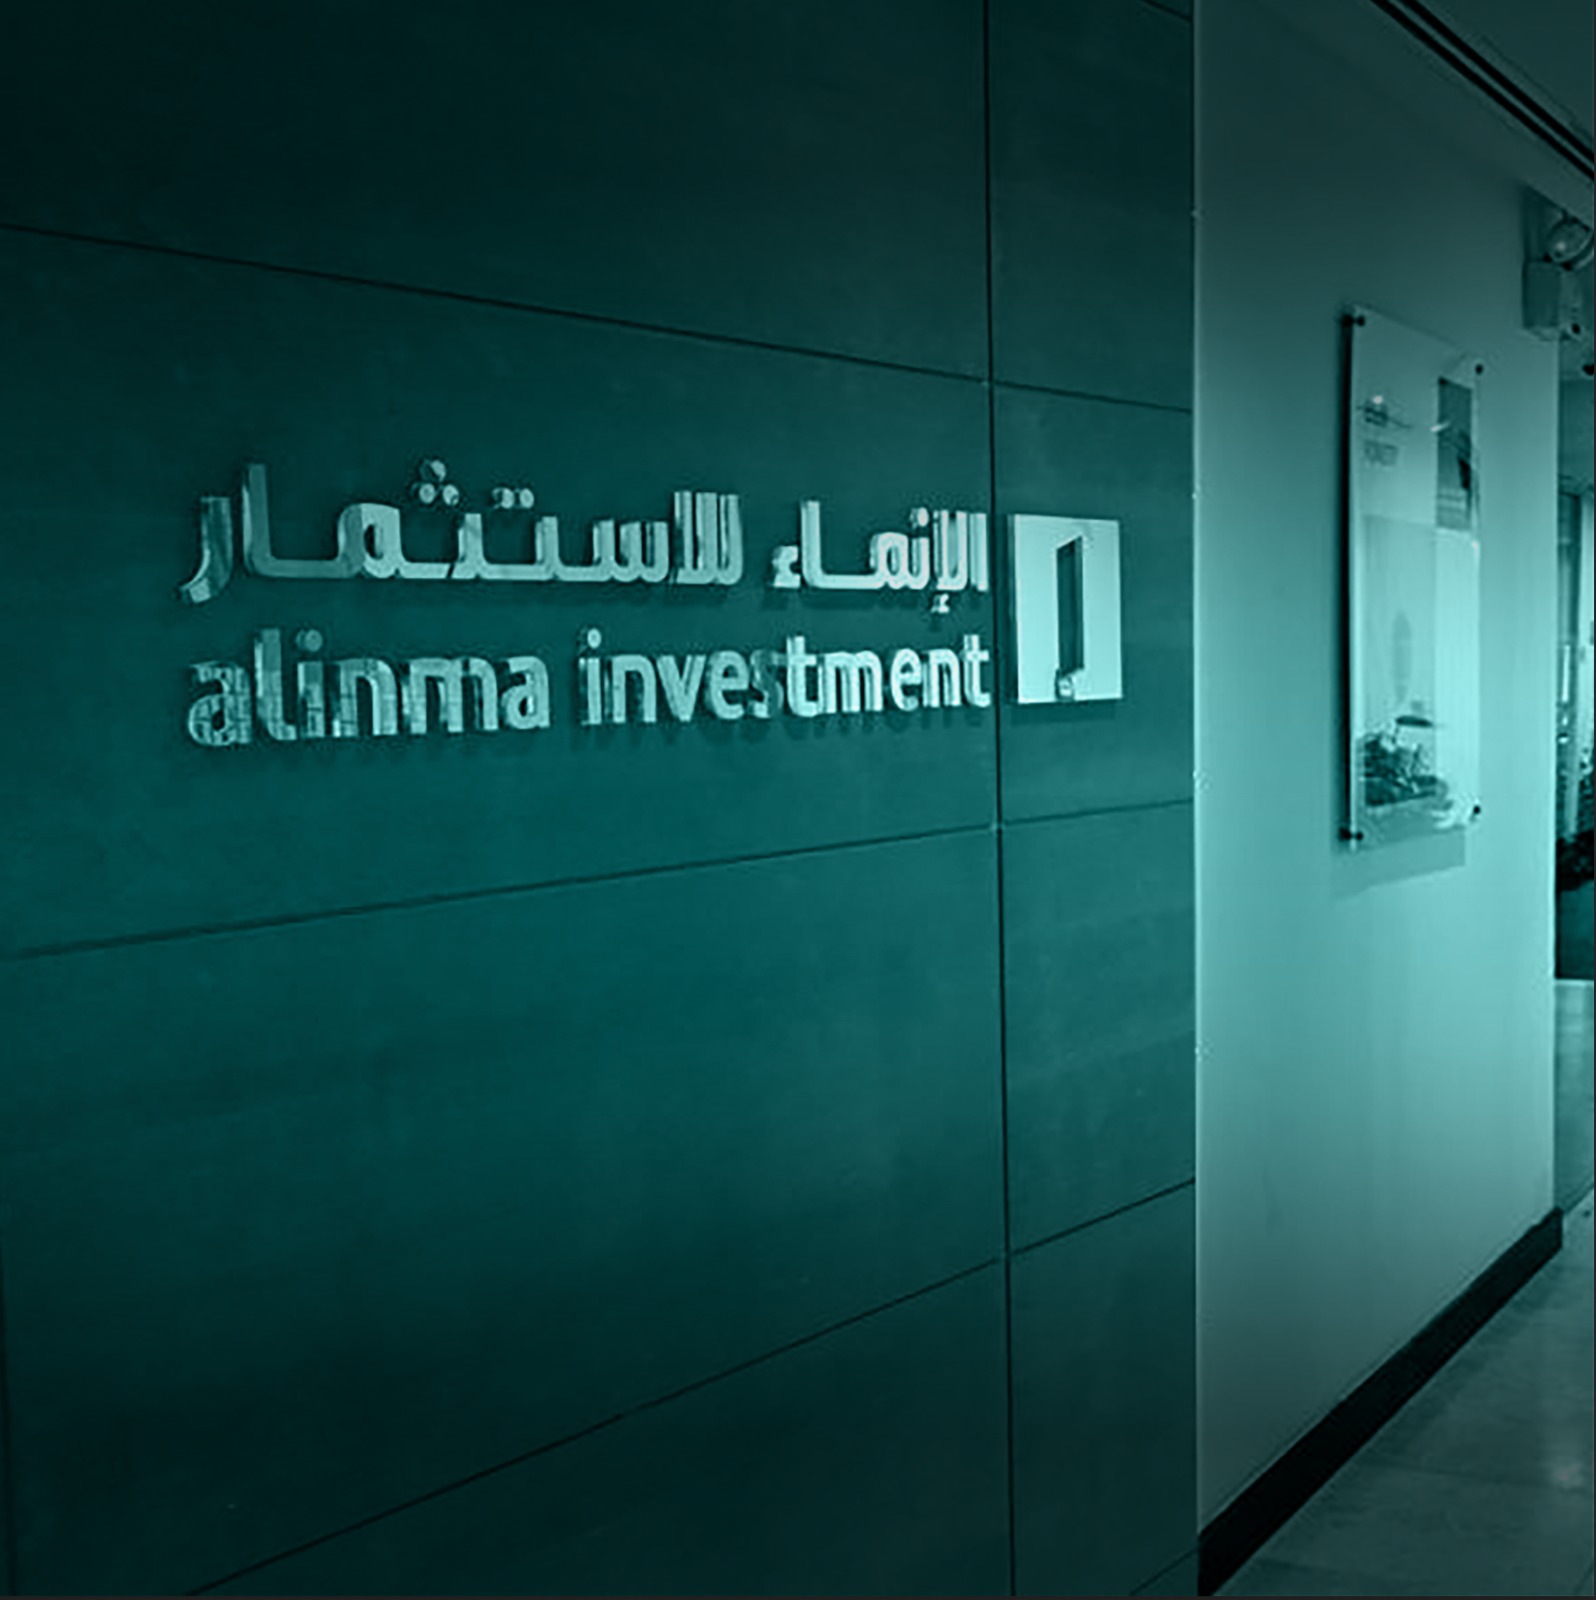 Non fundamental changes to Alinma IPO Fund